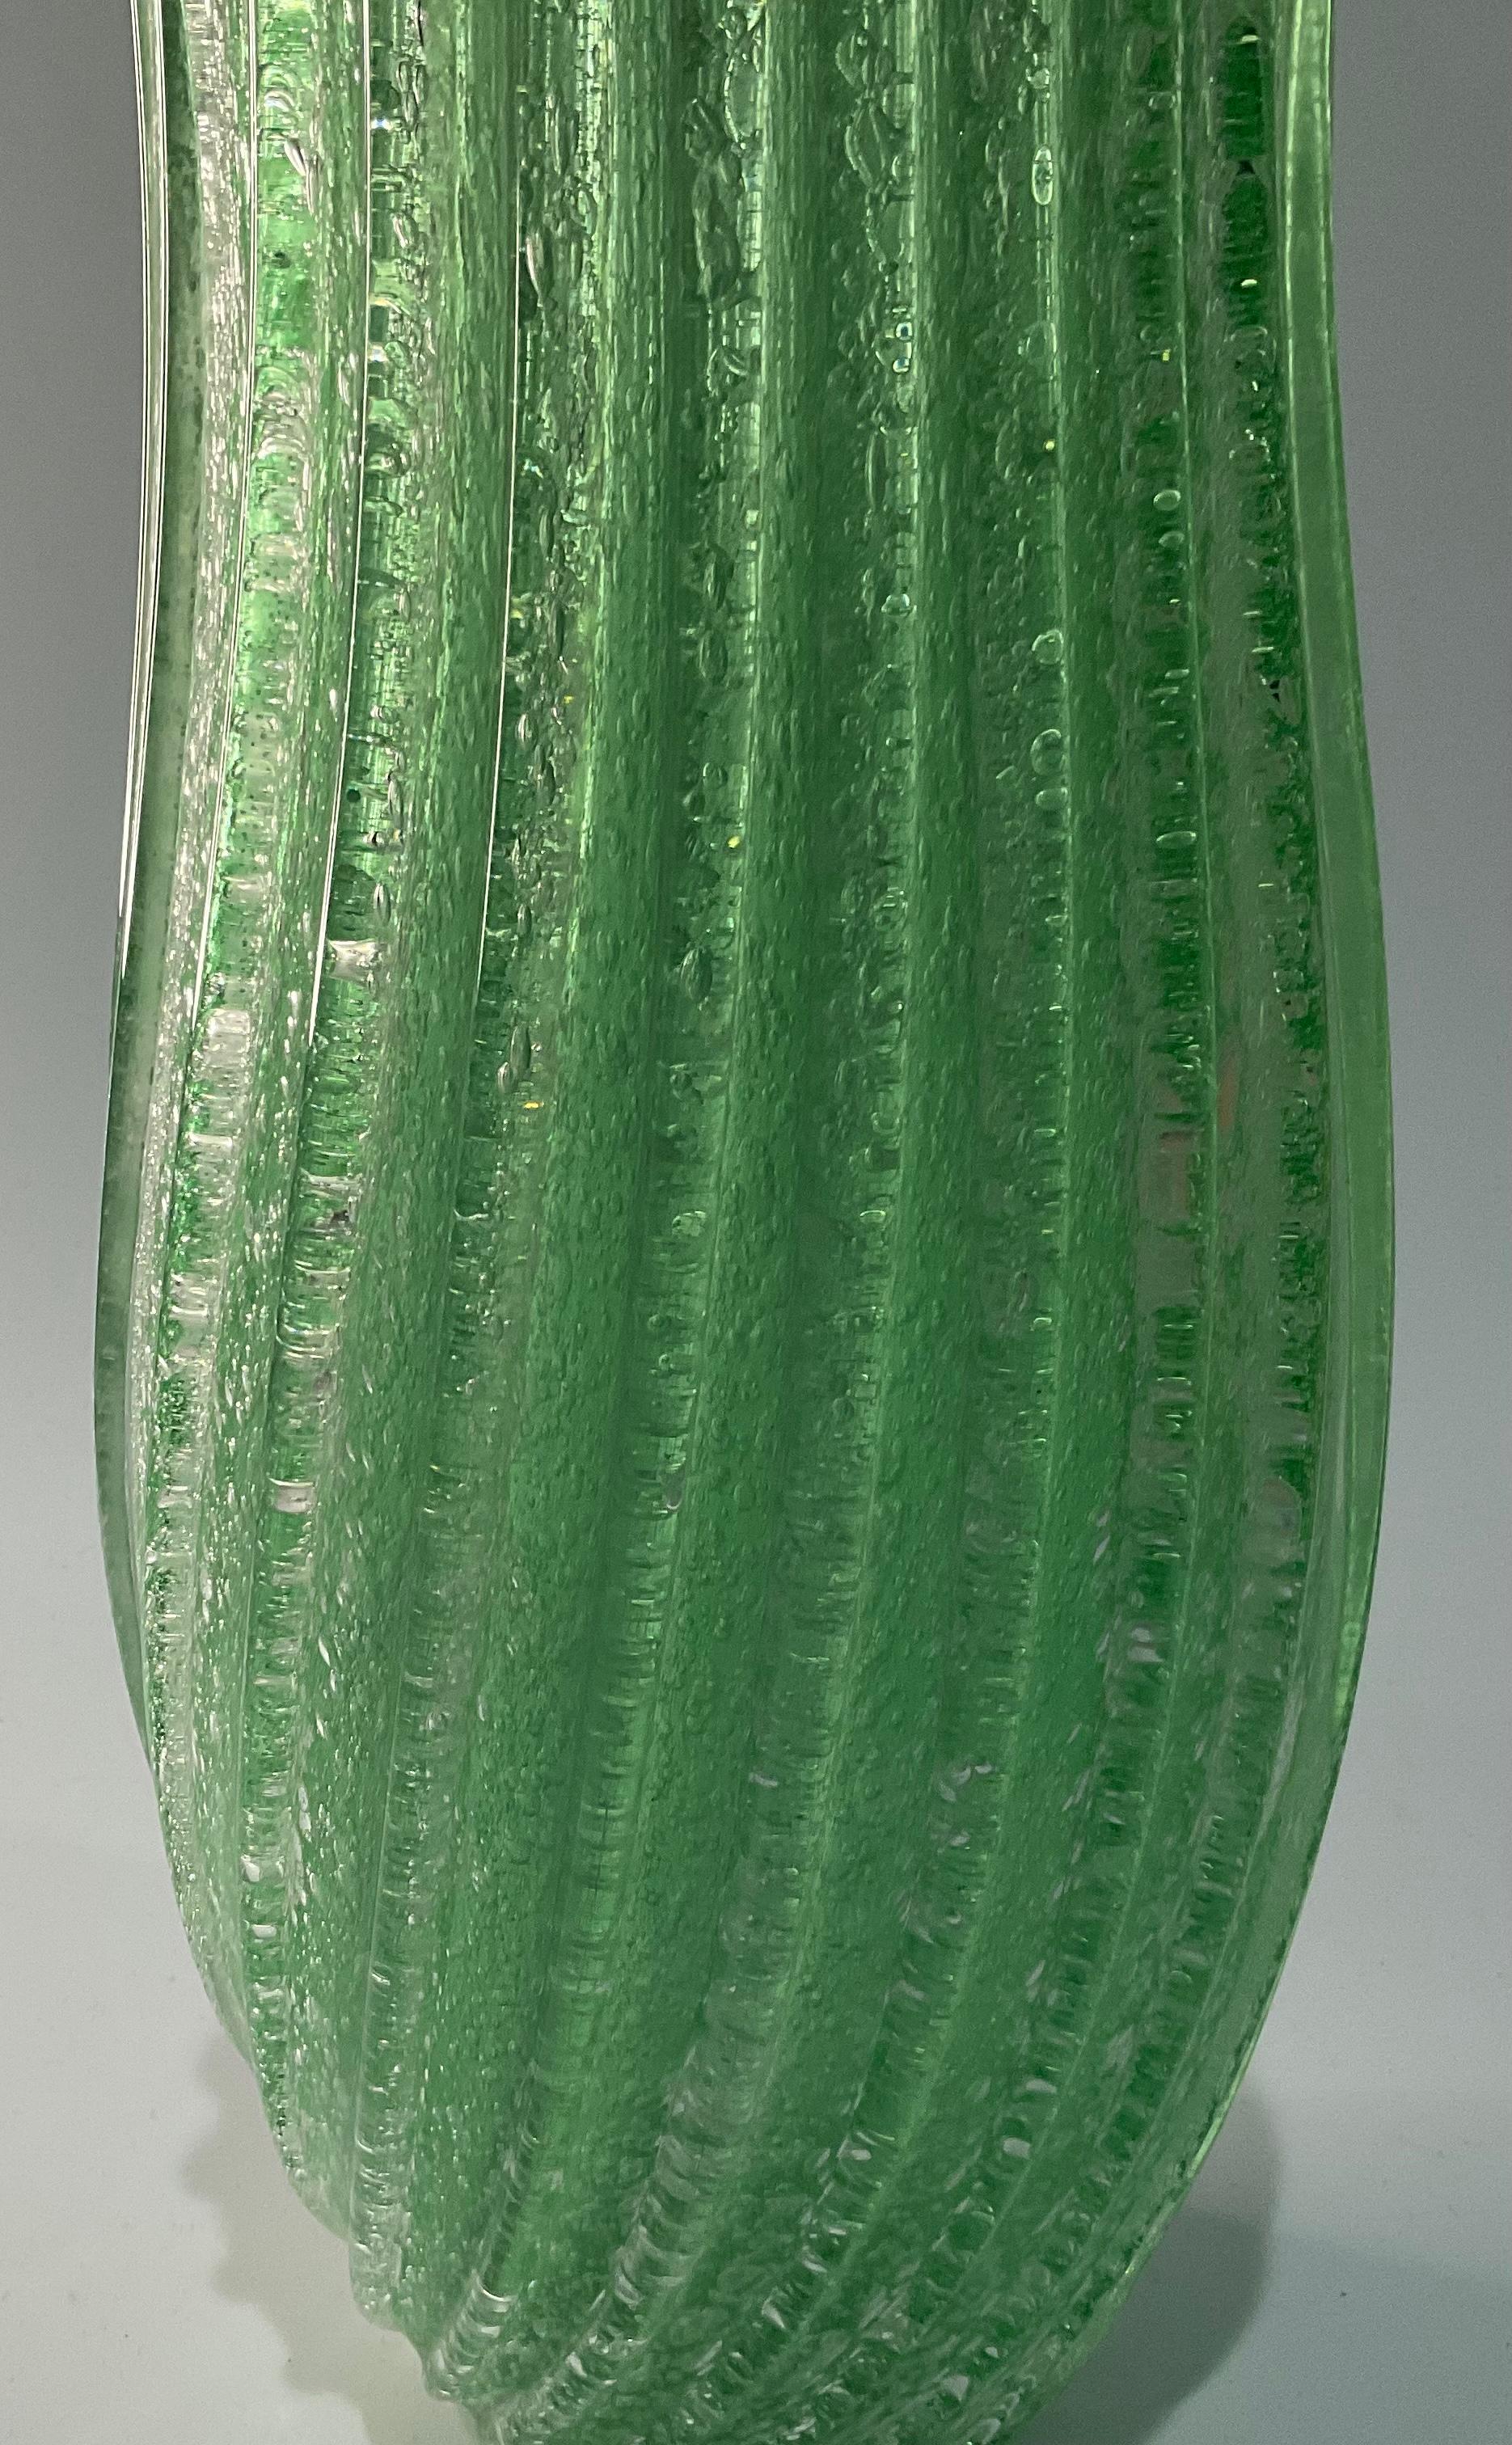 Large Murano Art Glass Vase in green Pulegoso glass with ribbed design scalloped Top. The vase is very tall for the era and stands alone.